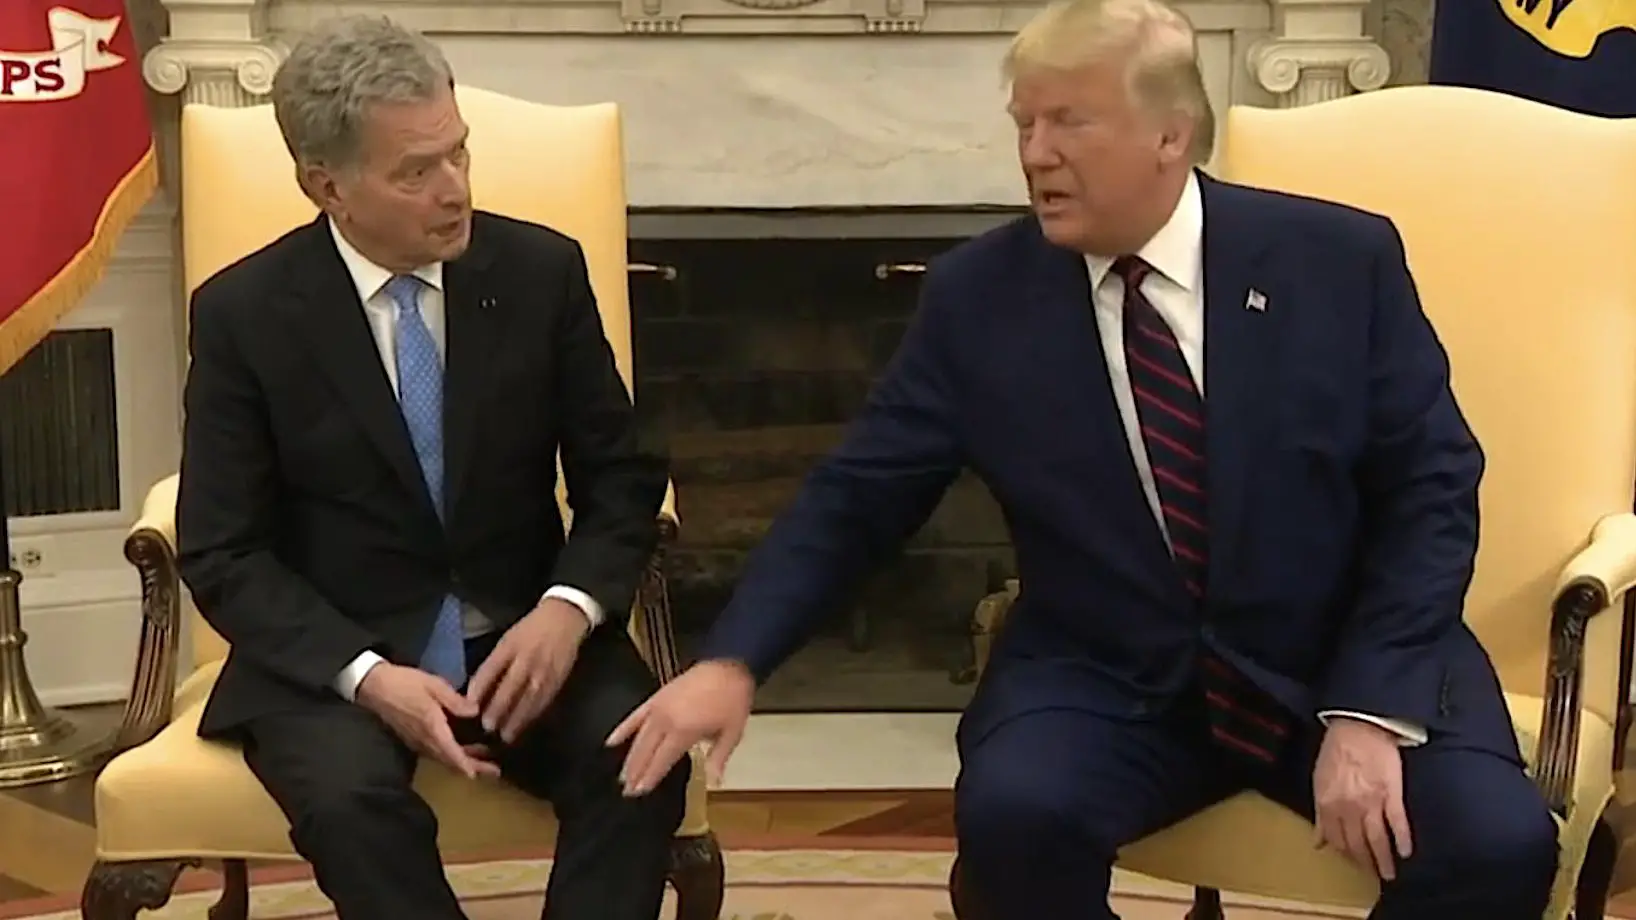 WATCH: Finland President Refuses Trumps Touch in Viral Video